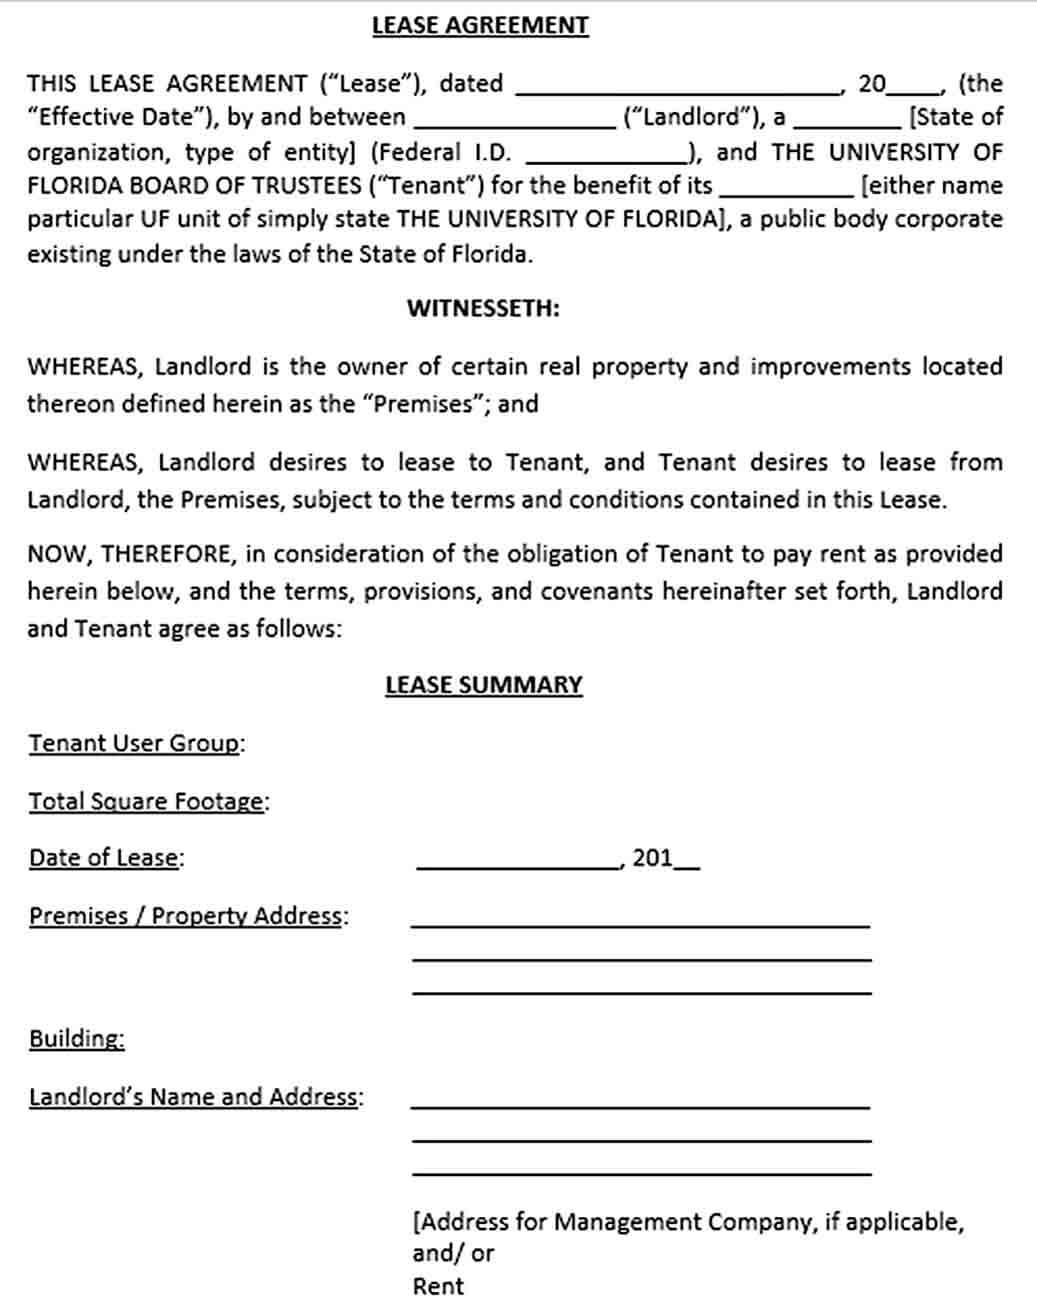 Sample Real Estate Lease Agreement Template